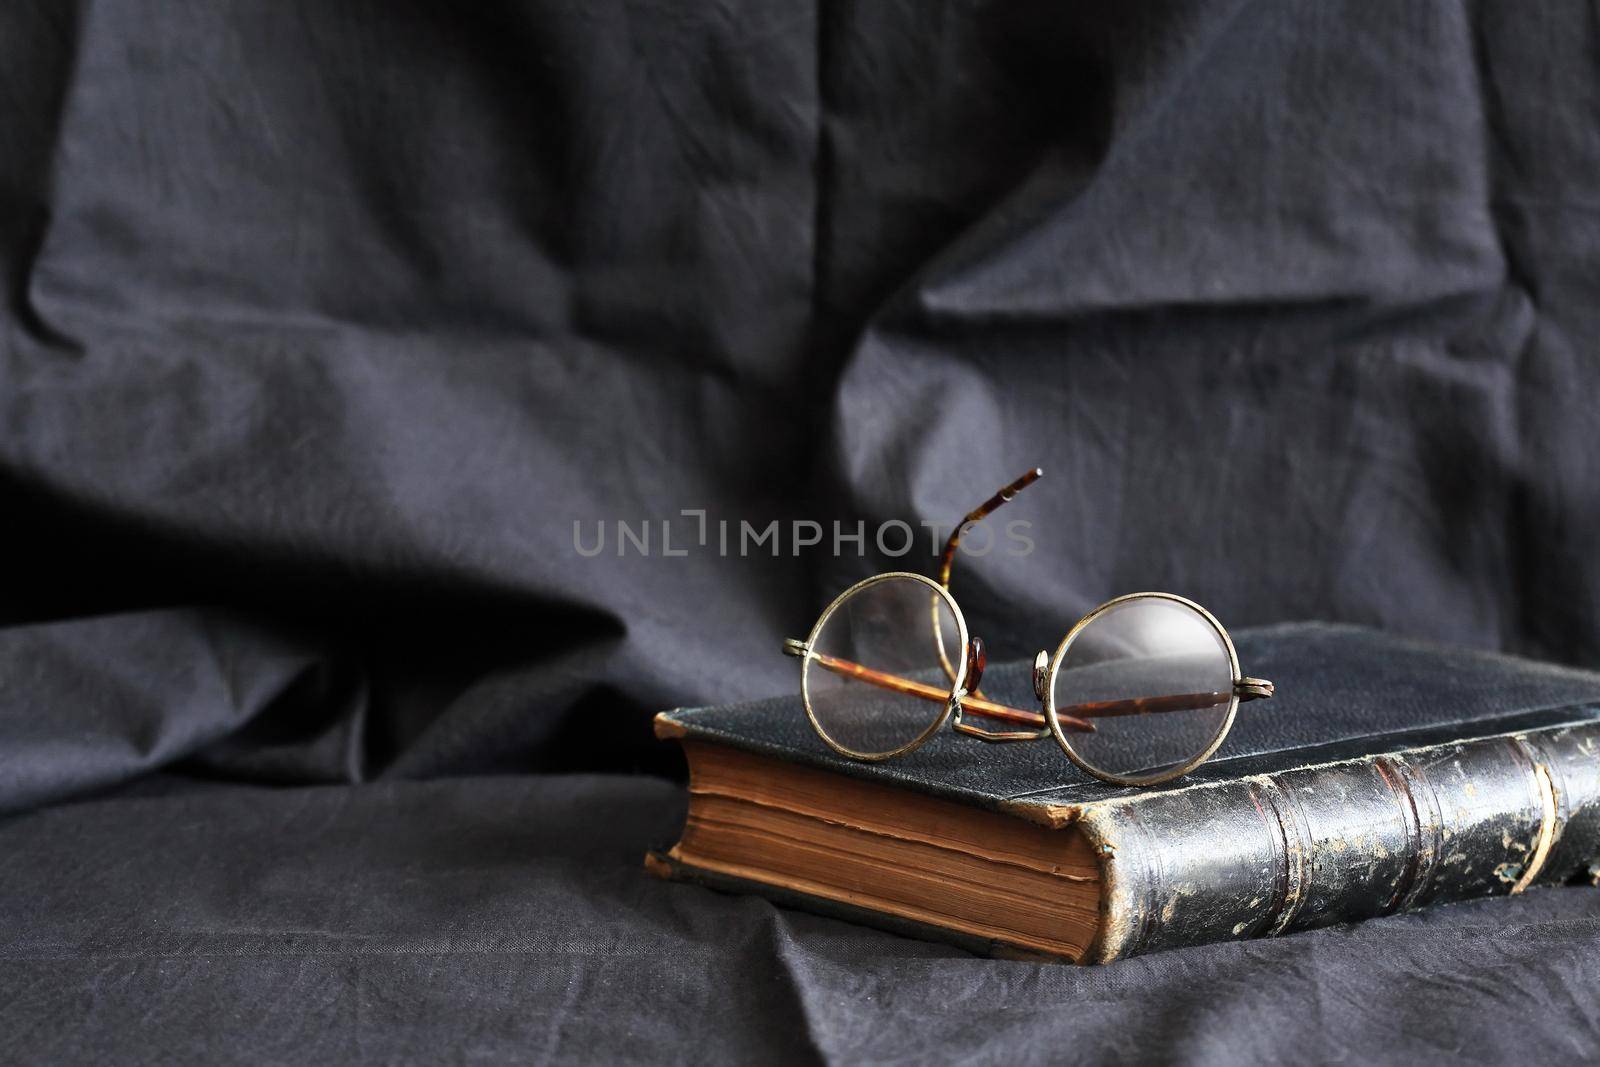 Old book and old glasses against dark textile beckground